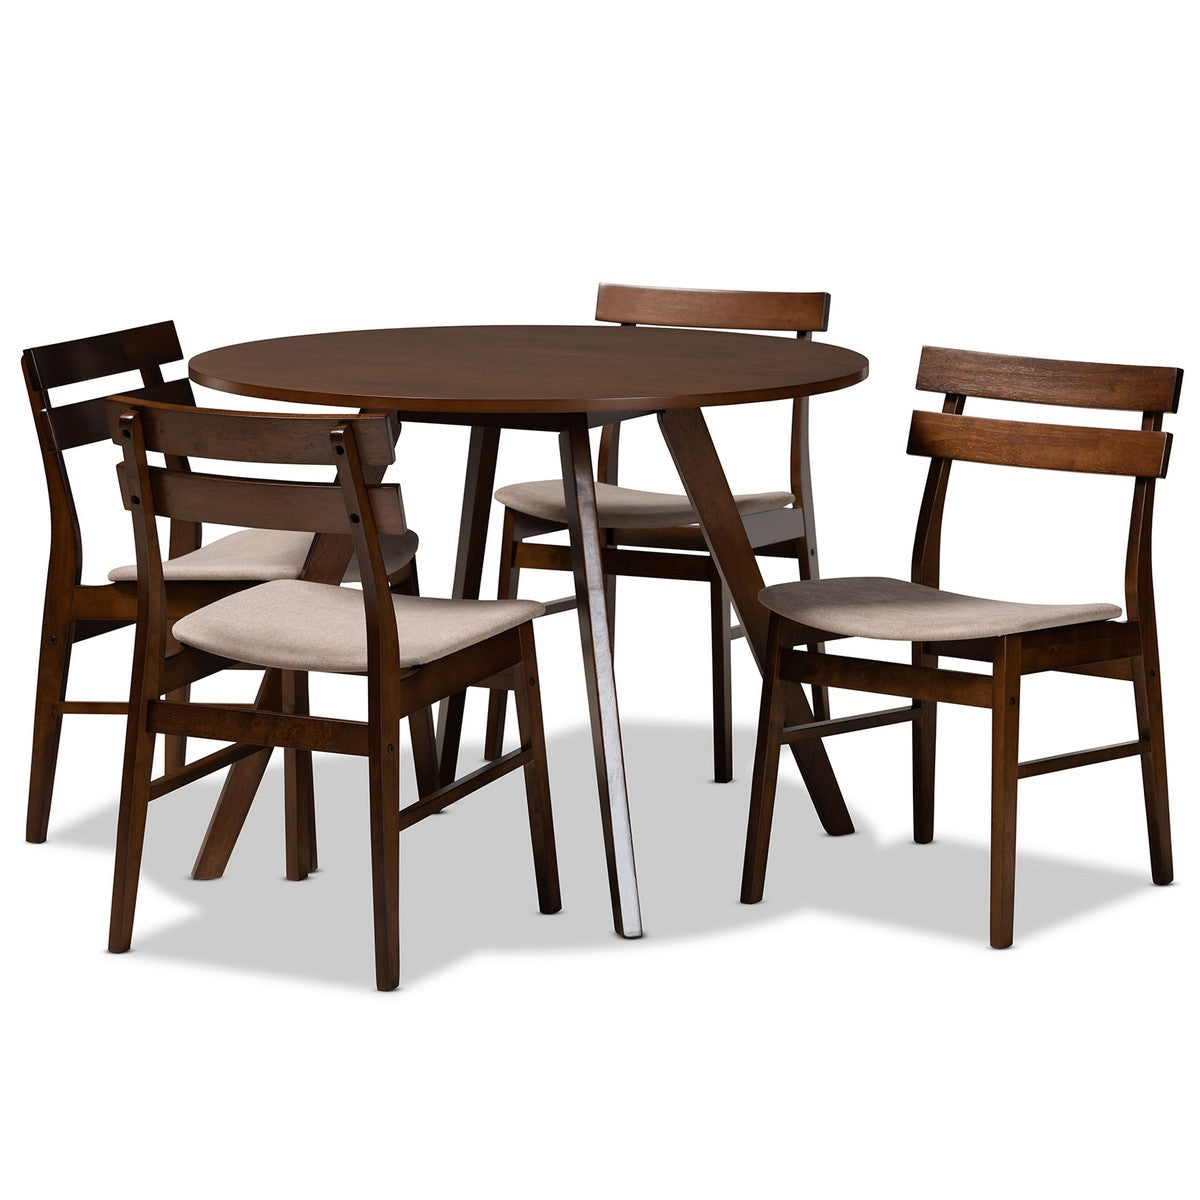 Baxton Studio Eiko Mid-Century Modern Transitional Light Beige Fabric Upholstered and Walnut Brown Finished Wood 5-Piece Dining Set Baxton Studio-Dining Sets-Minimal And Modern - 1